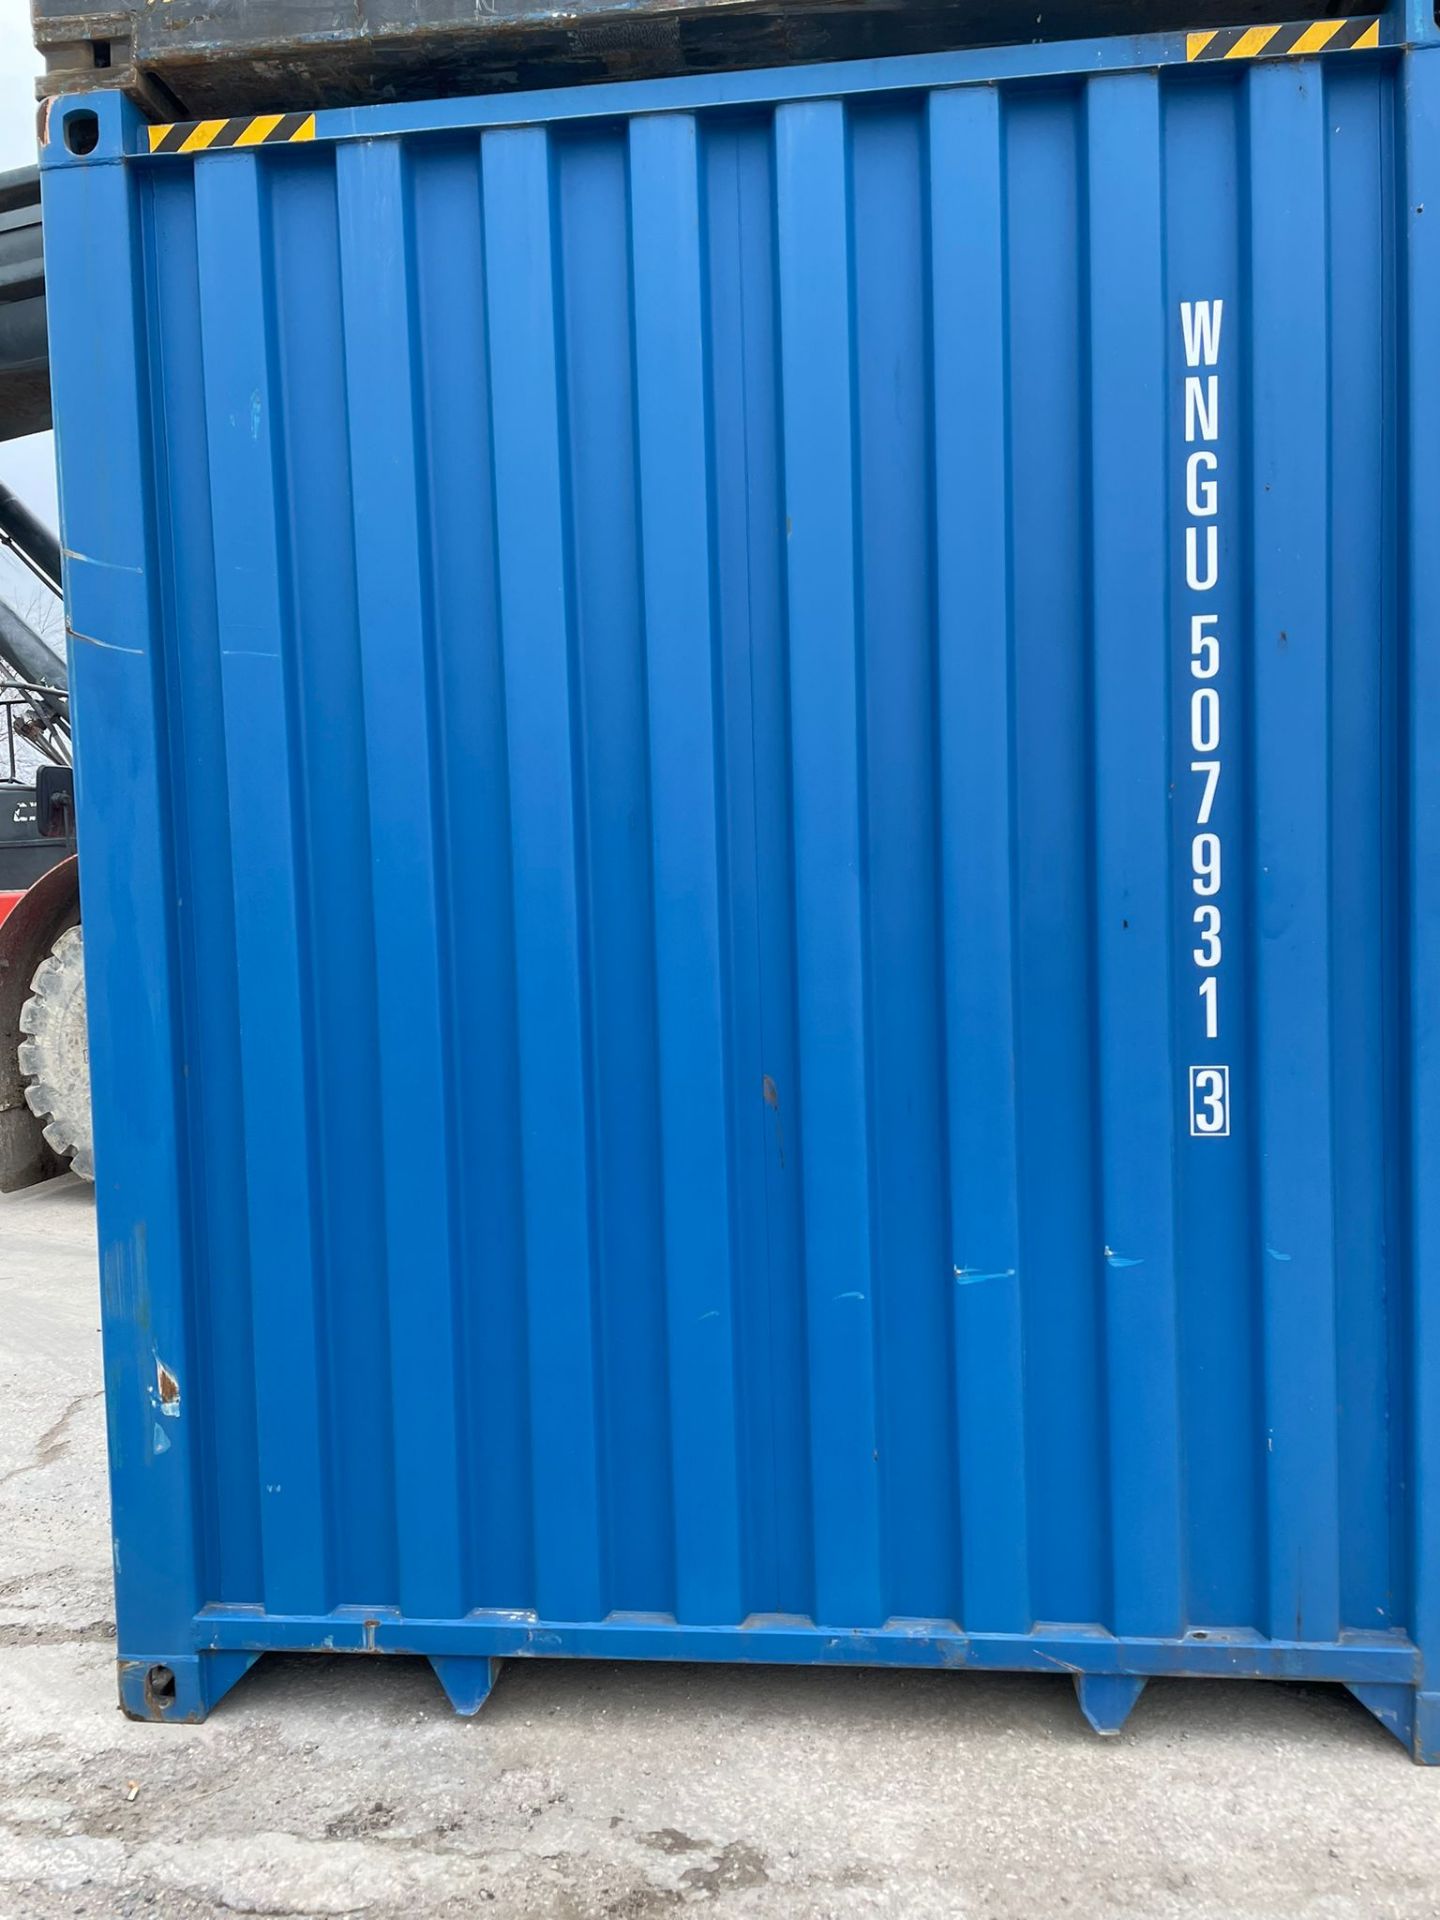 40ft HC Shipping Container - ref WNGU5079313 - Image 5 of 5